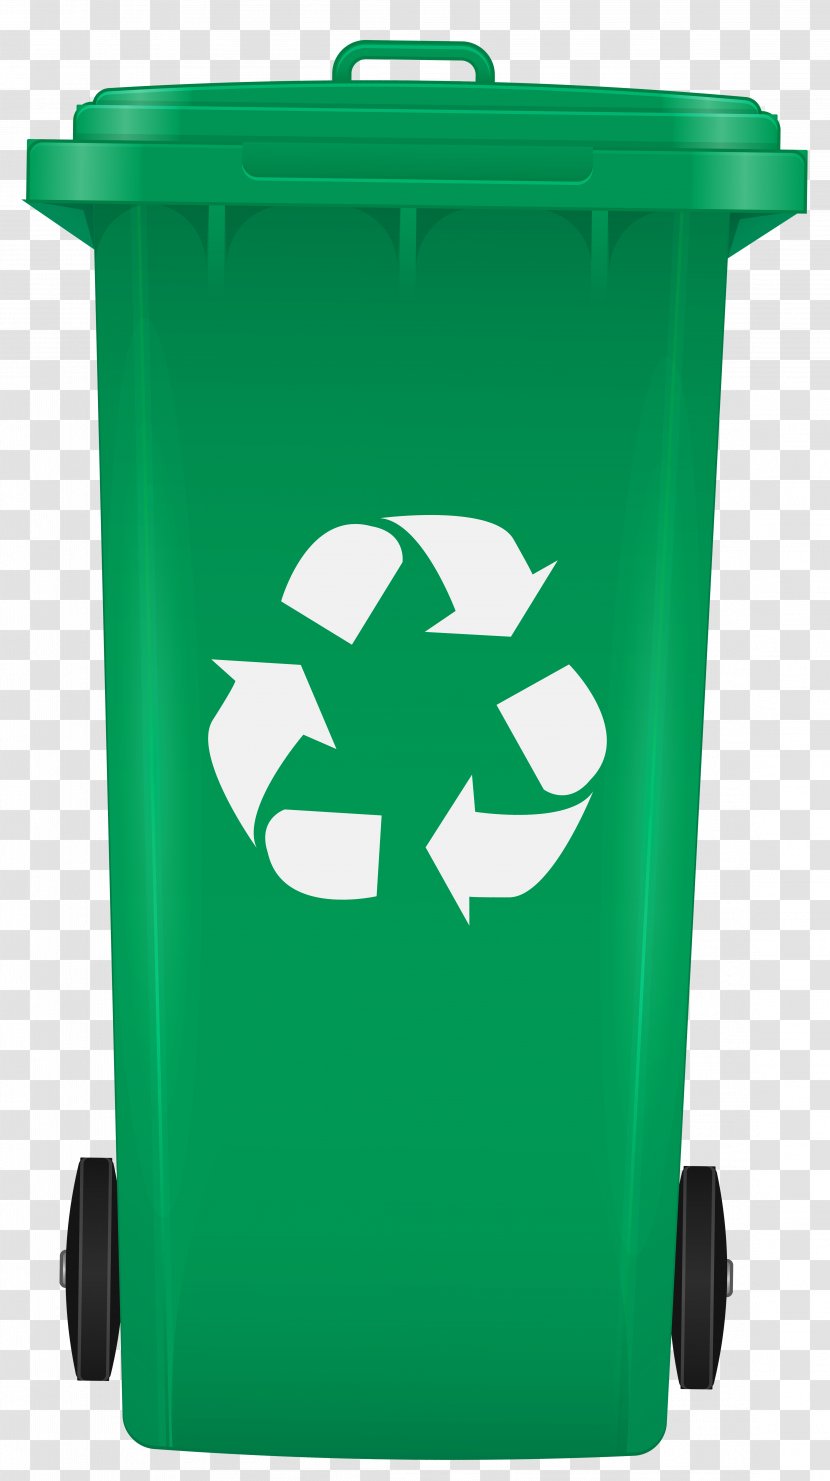 Recycling Bin Rubbish Bins & Waste Paper Baskets Collection - Recycle Transparent PNG